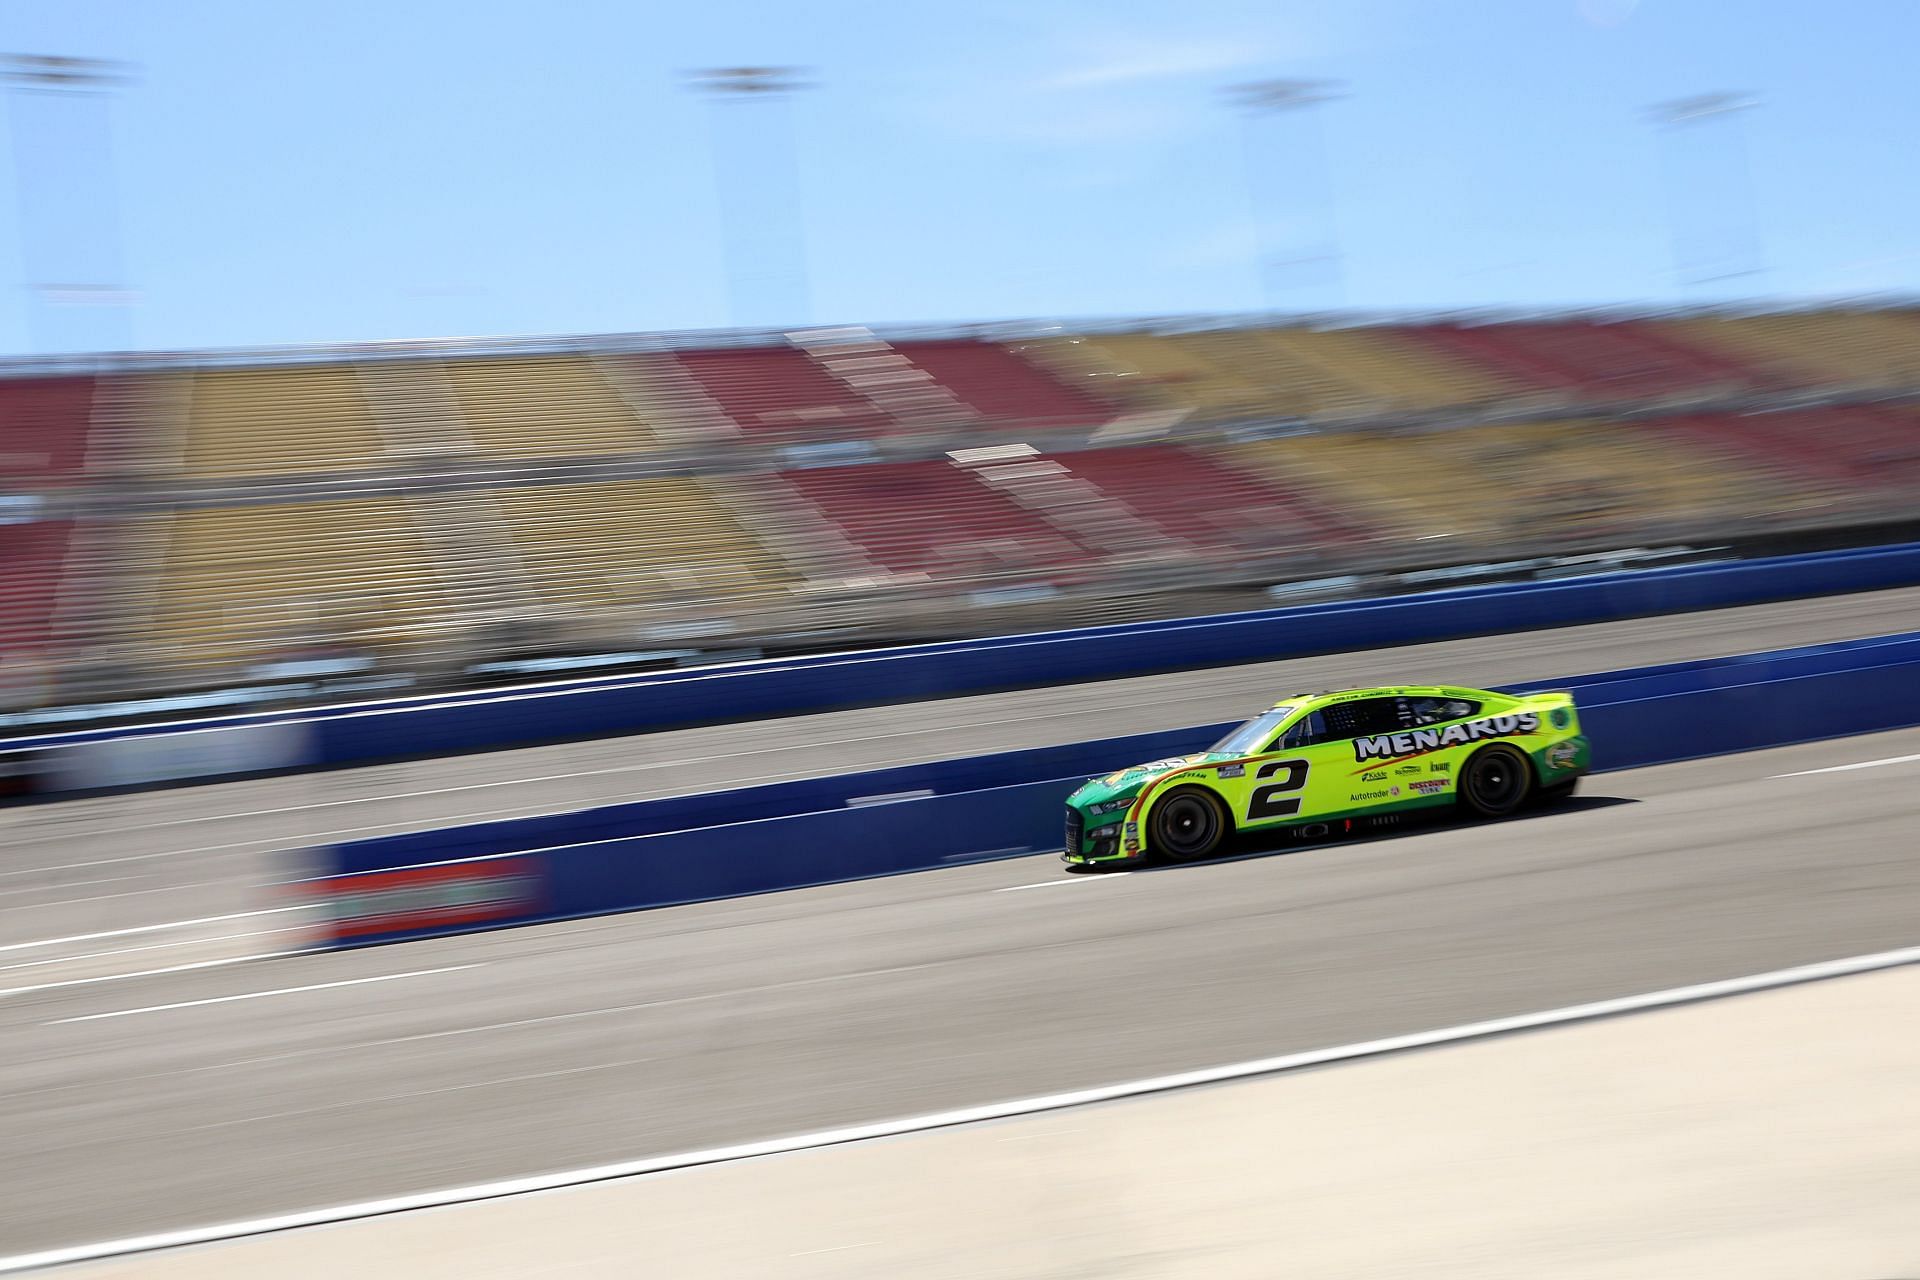 Next Gen car during practice for WISE Power 400 at Auto Club Speedway